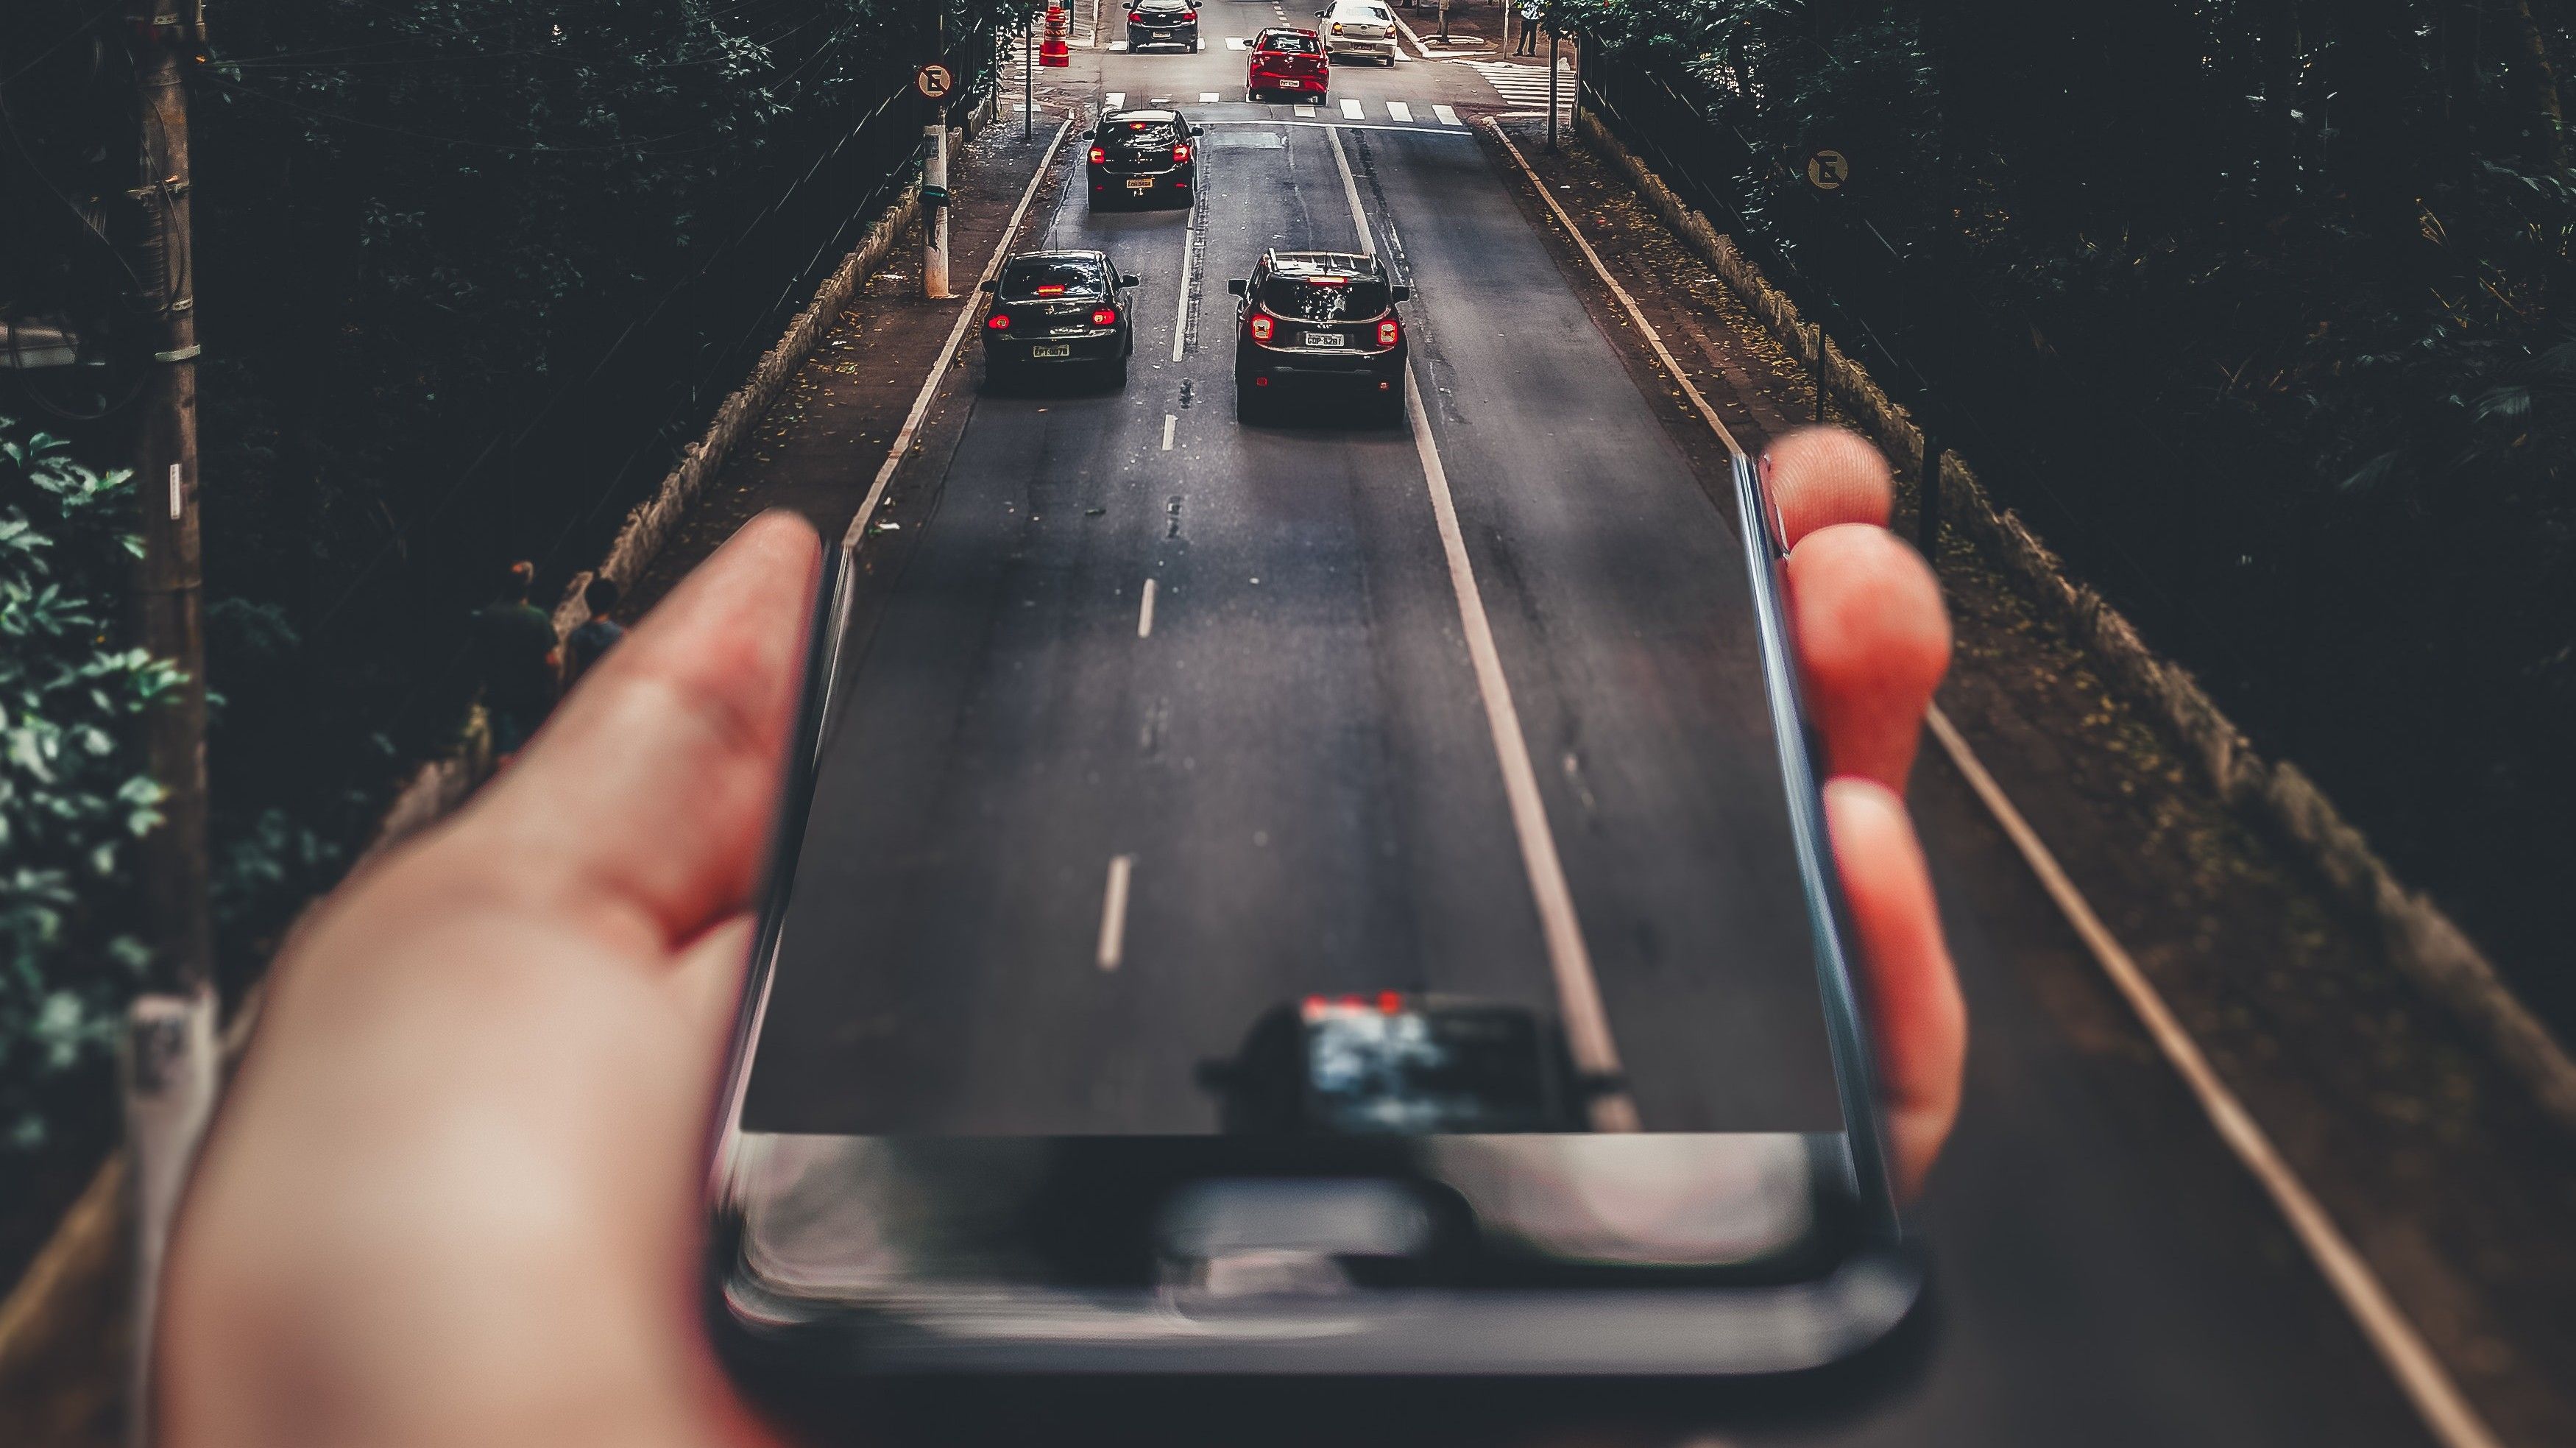 Forced perspective cars and road on the phone screen